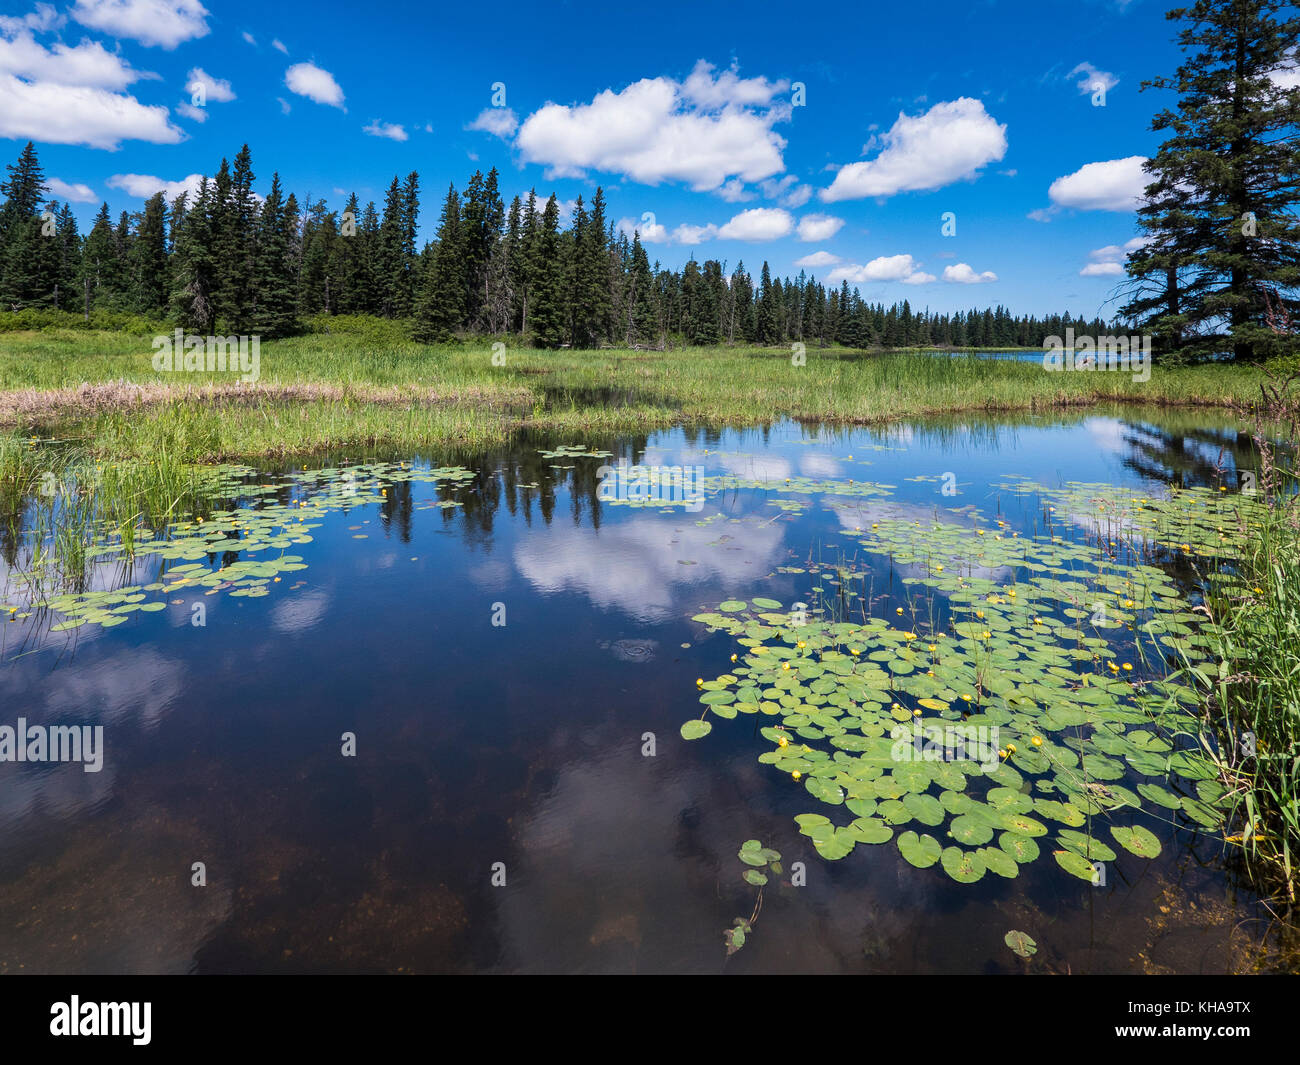 Lower end of Whirlpool Lake, Riding Mountain National Park, Manitoba, Canada. Stock Photo